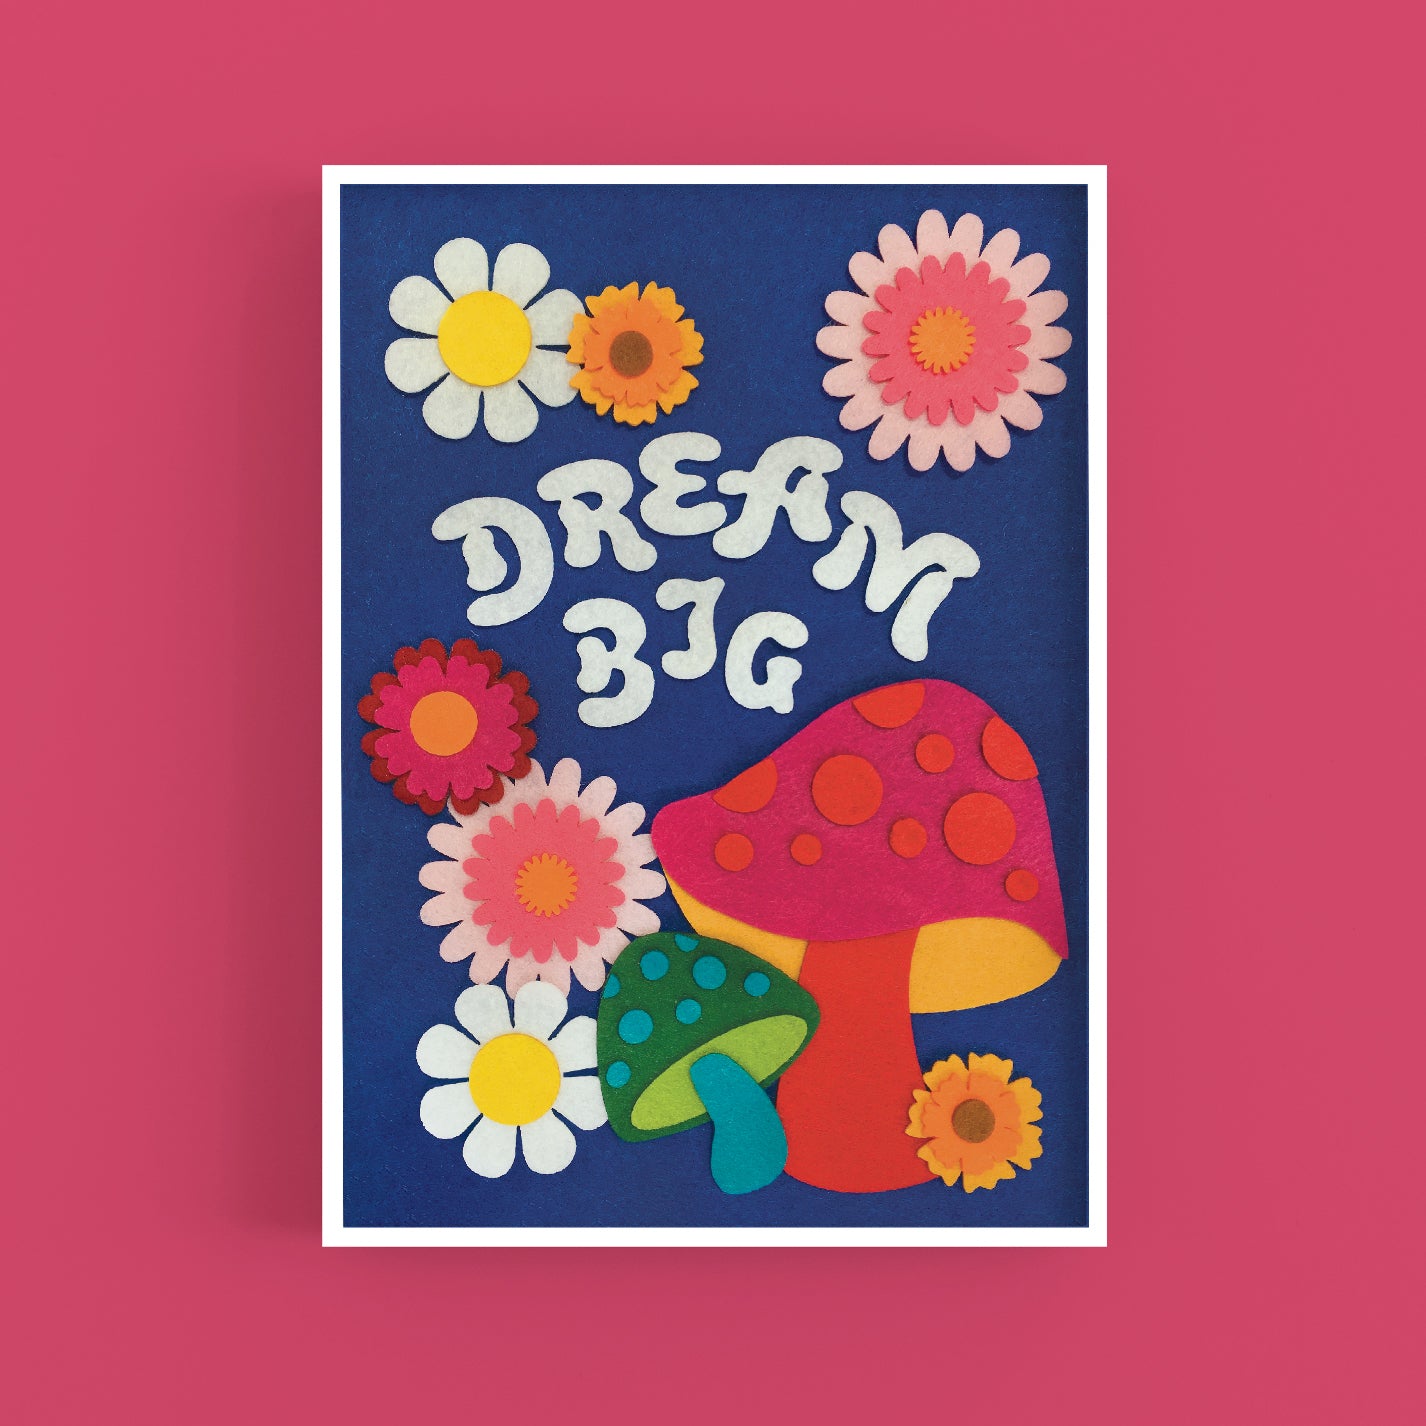 An A3 art print of a felt collage design. The design features felt flowers and mushrooms and the words Dream Big, on a blue felt background. The print is framed on a magenta background.